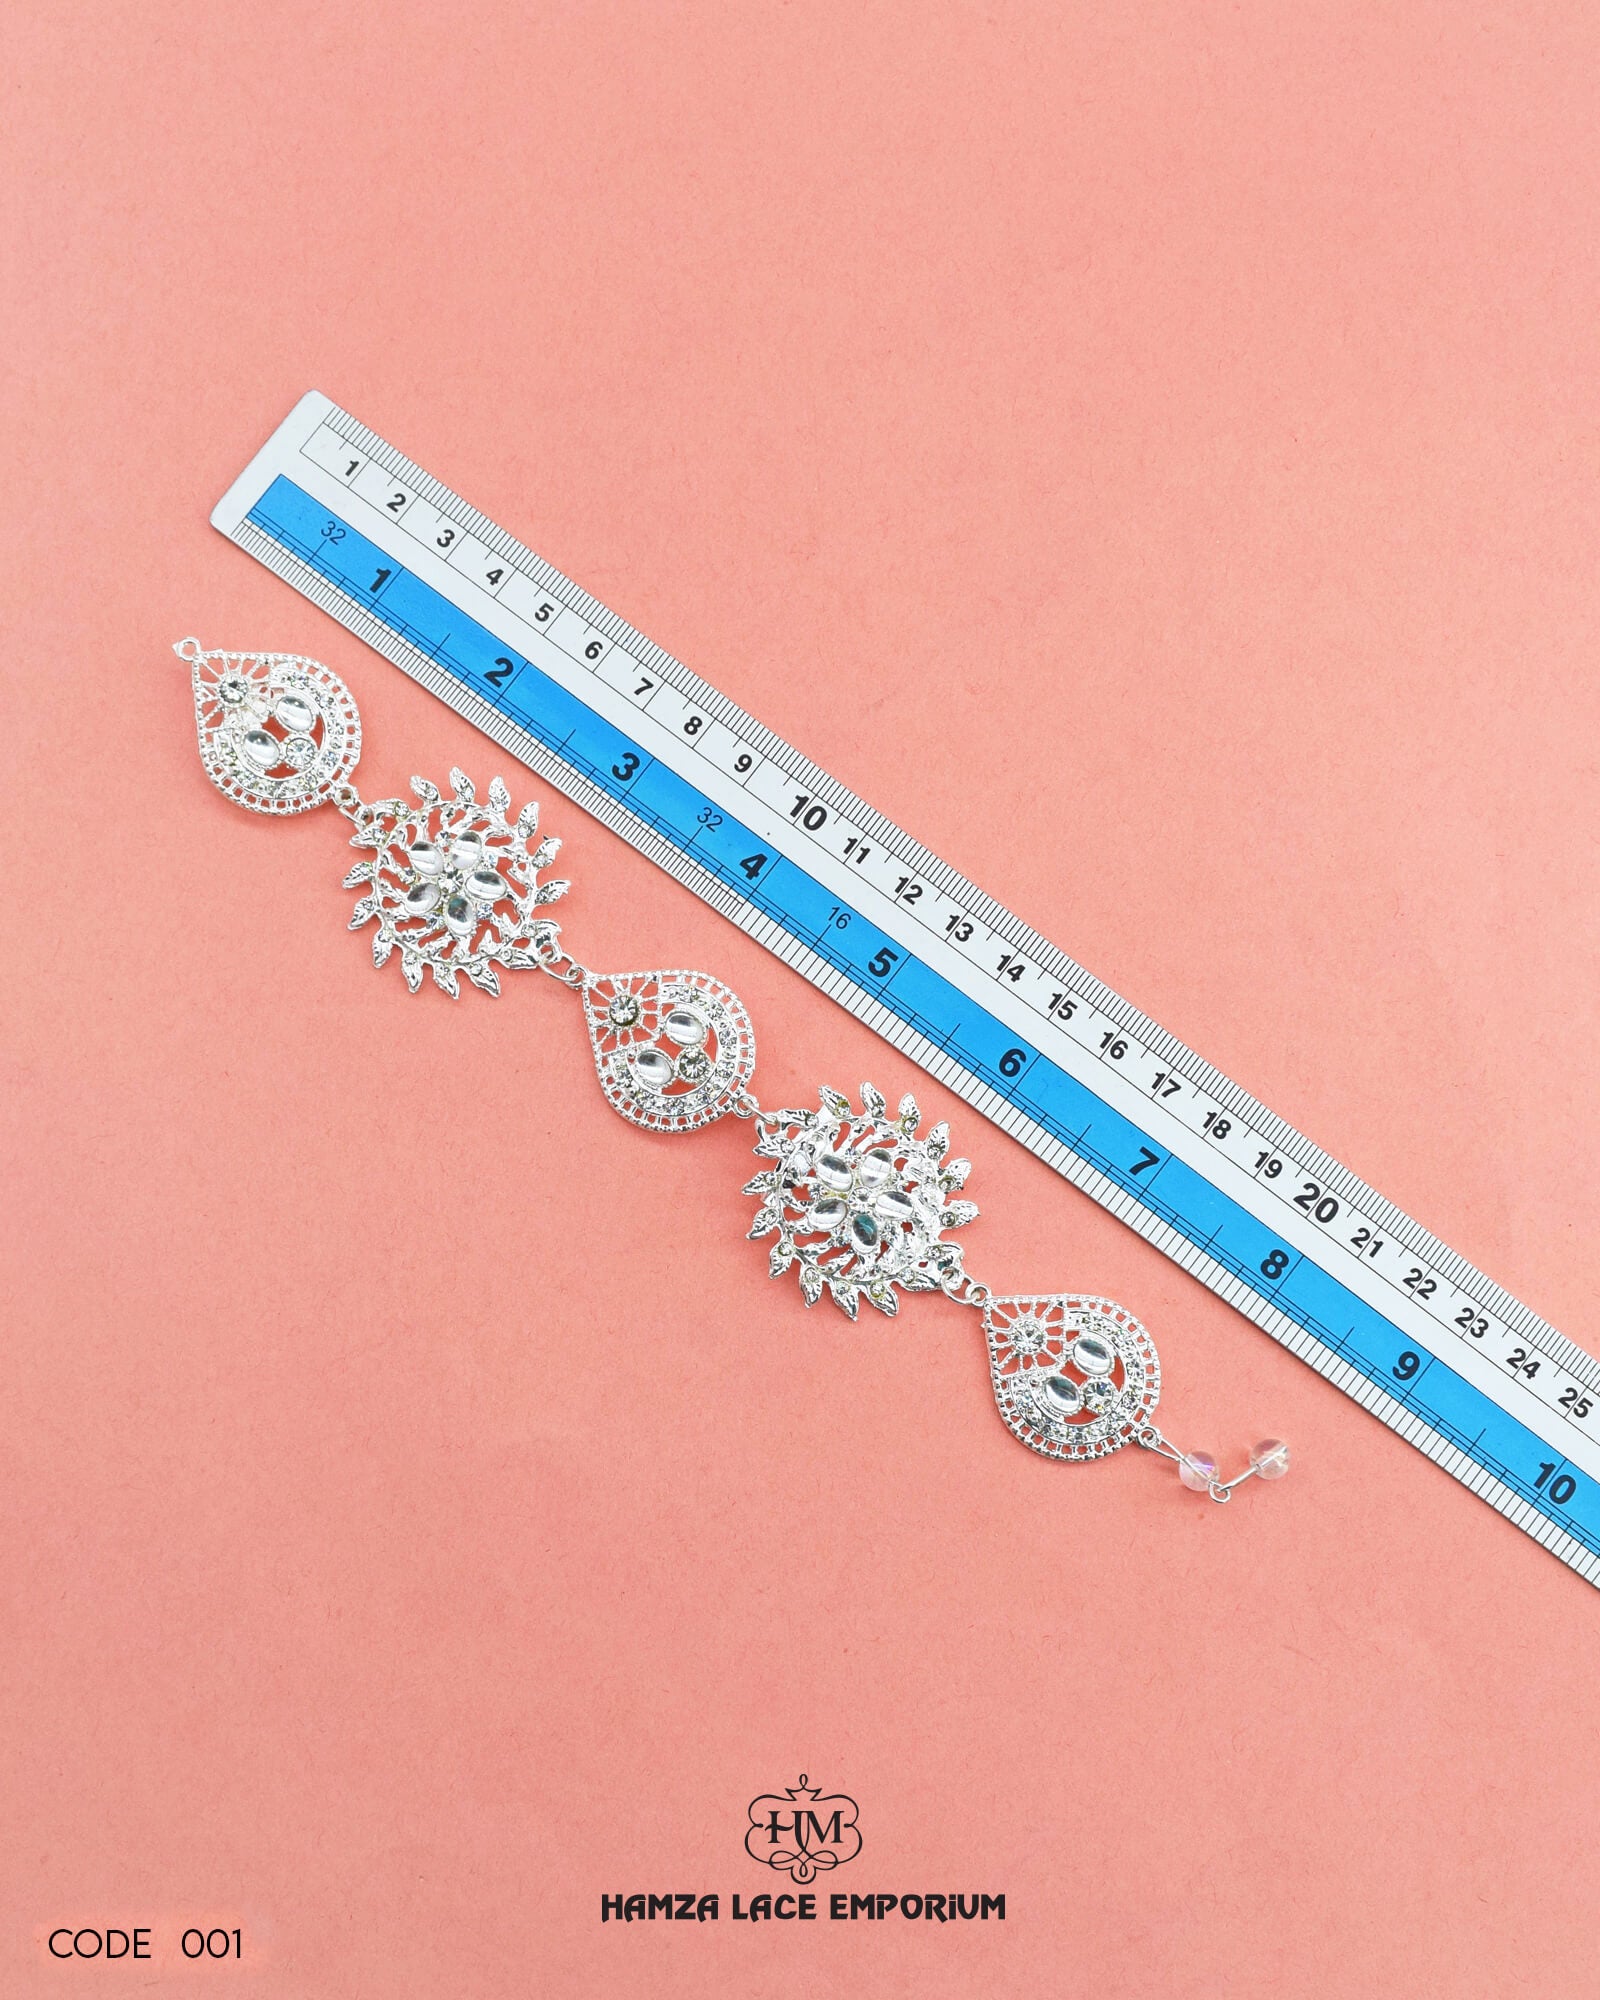 The 'Button Patti 001' size is showcased using a ruler for precise measurement.